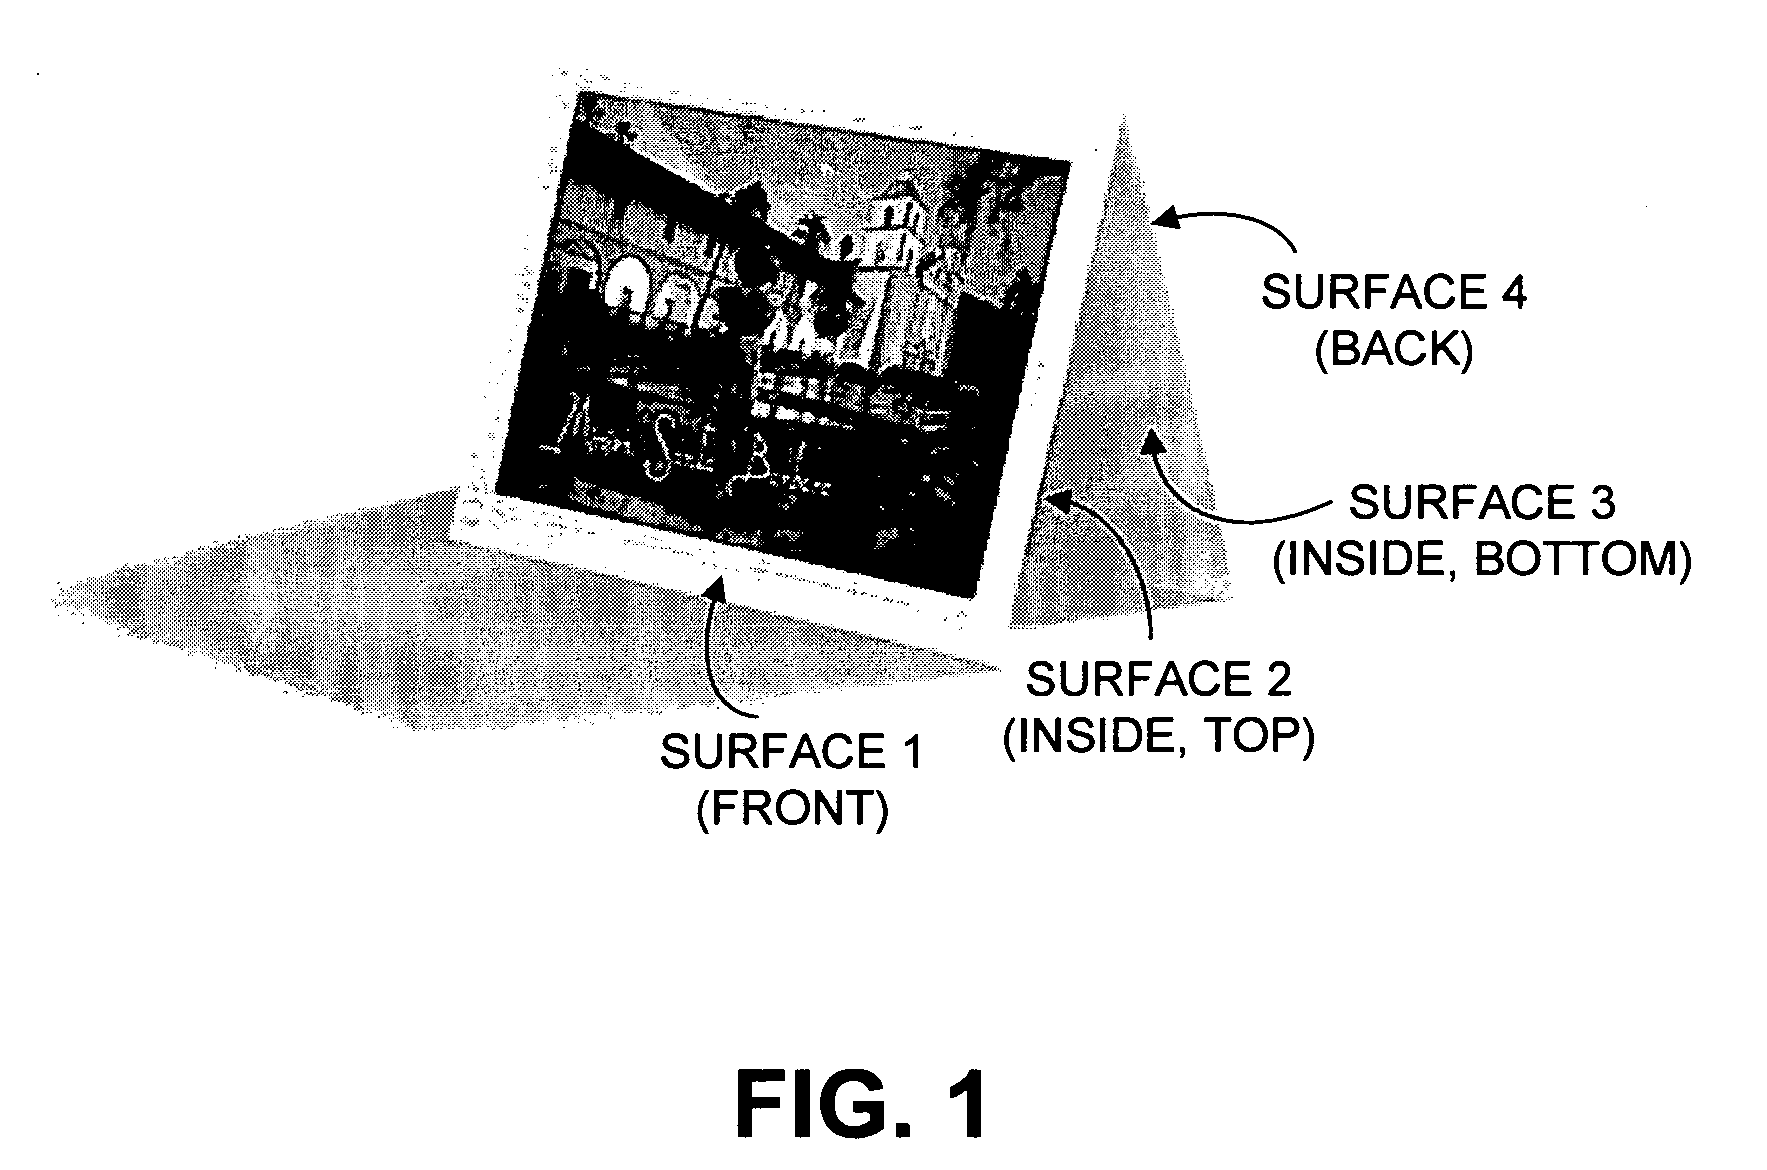 Multiproduct printing workflow system with dynamic scheduling